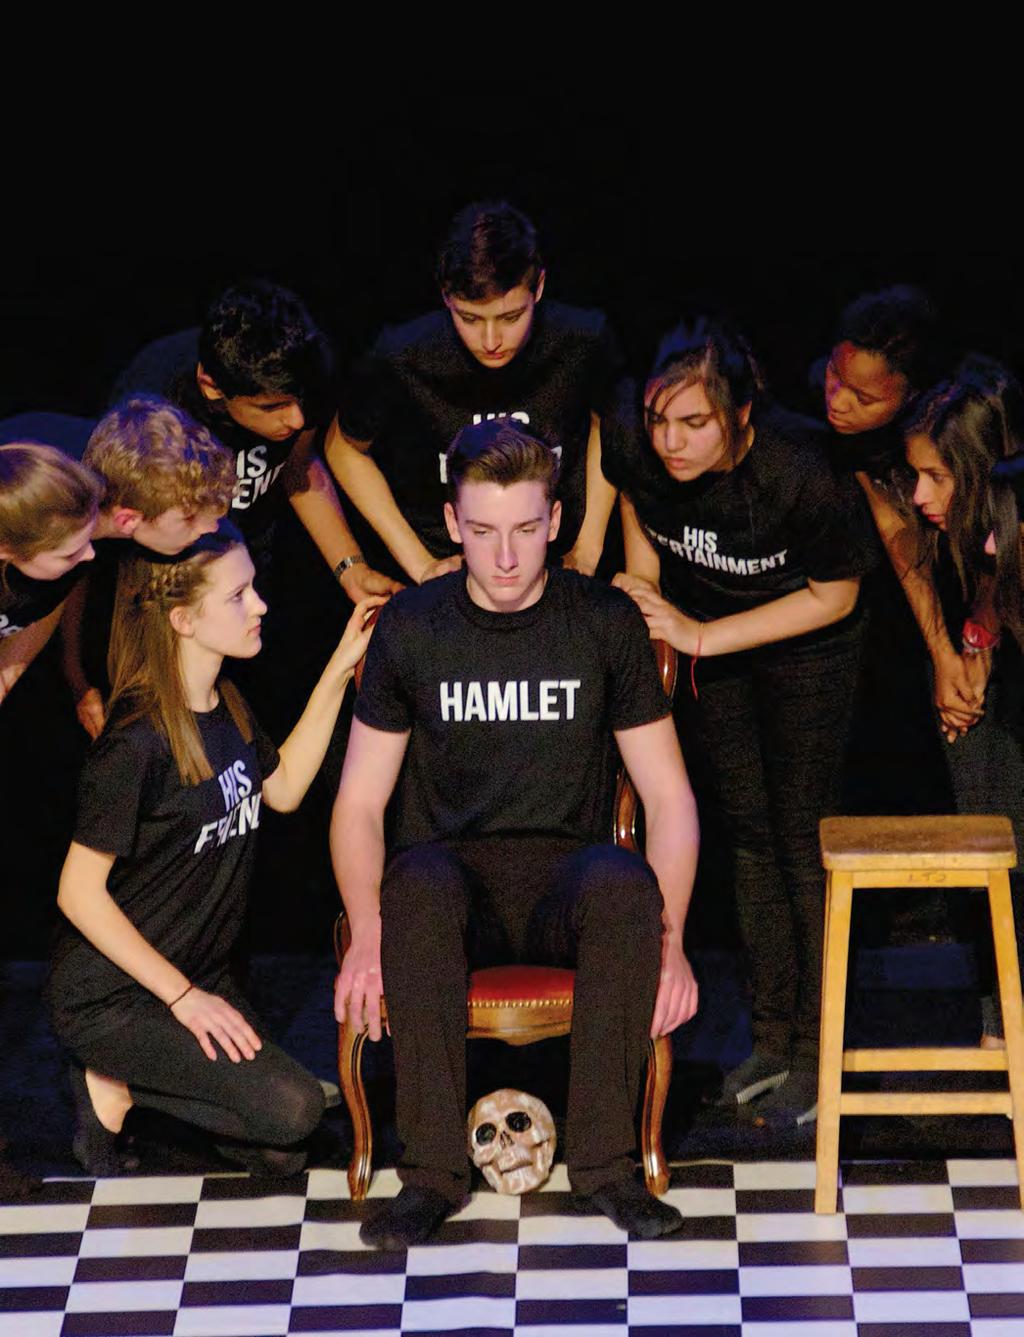 Students performed Halet as part of the Shakespeare Schools Festival at the Curve Theatre.